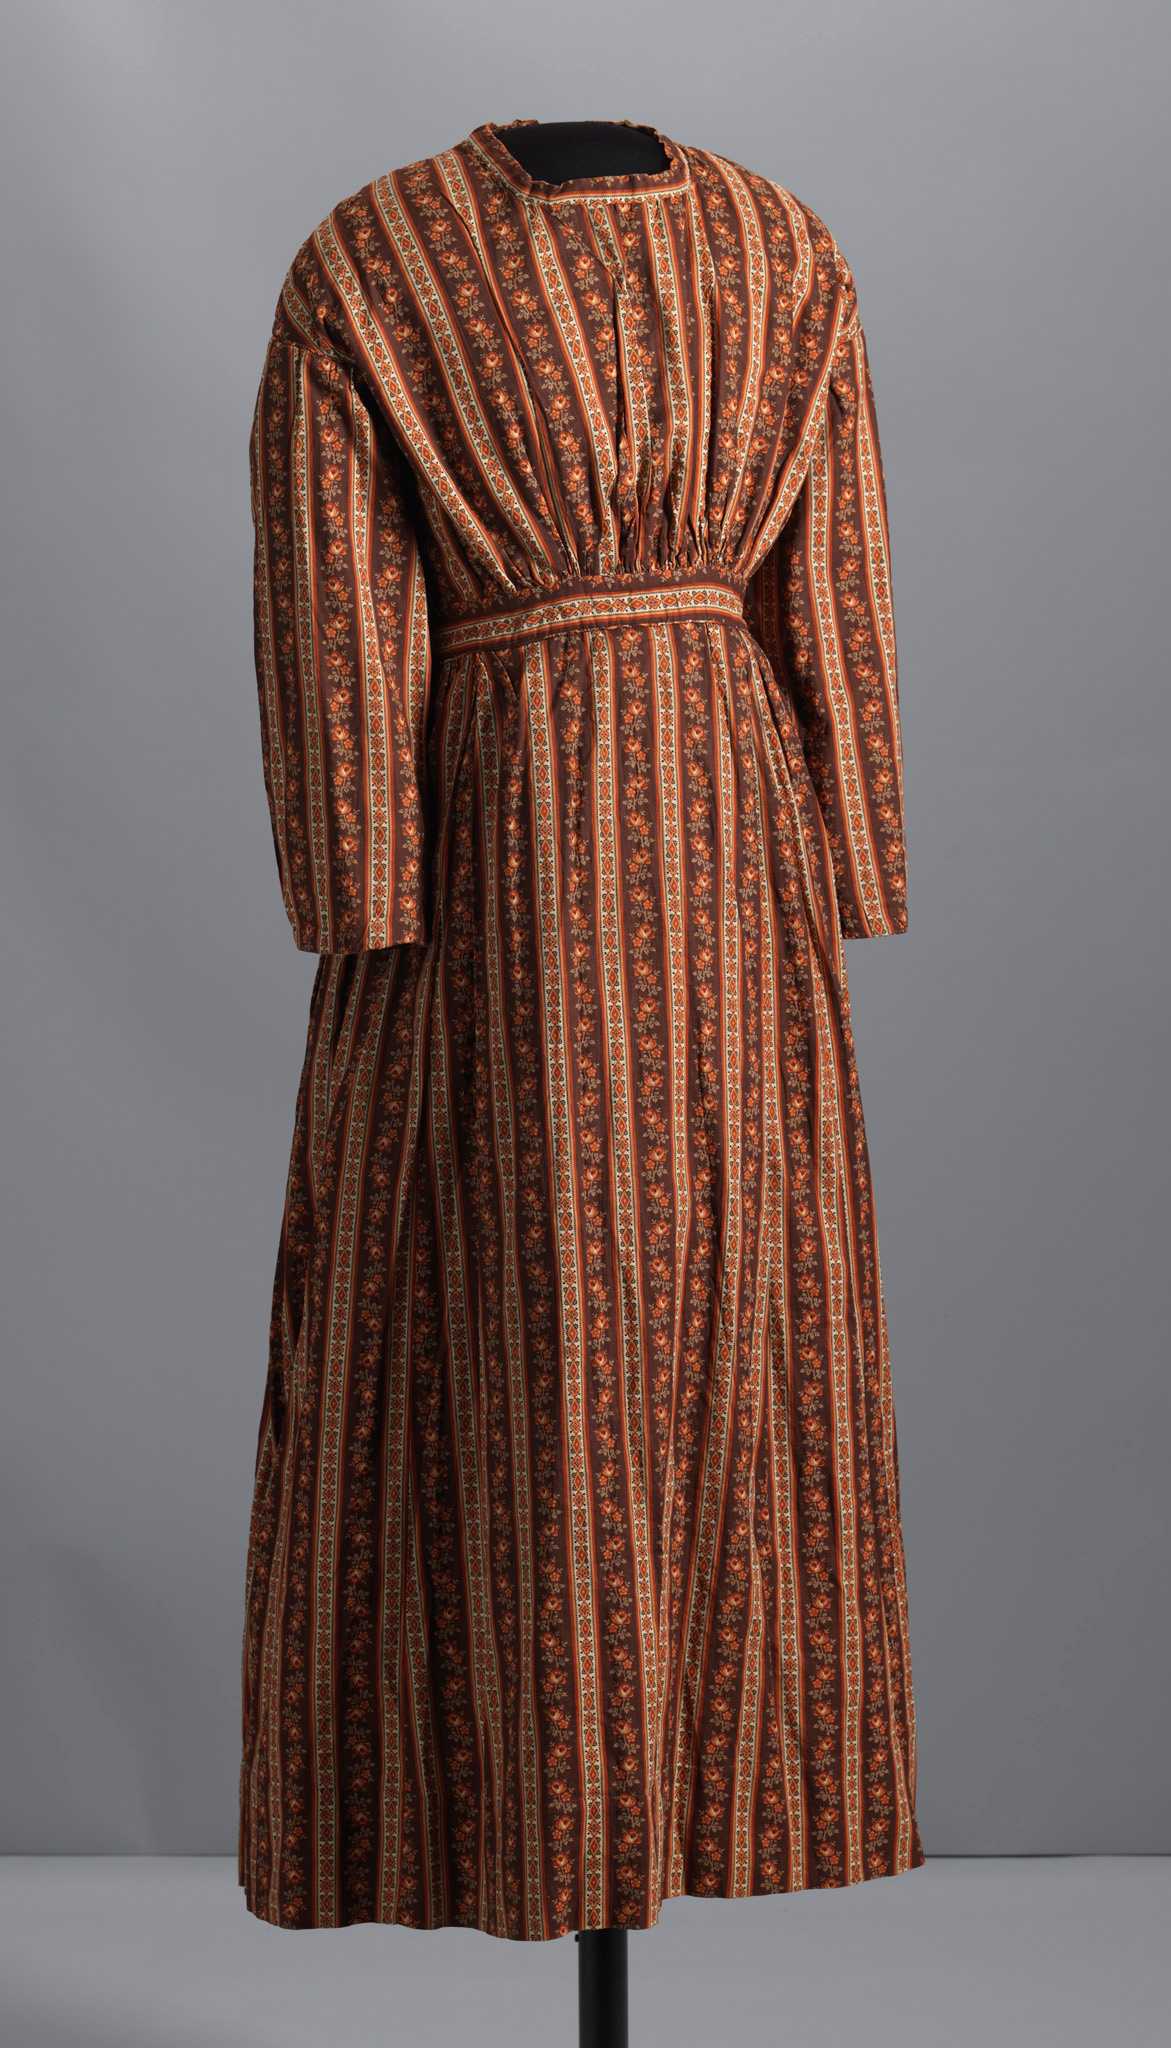 This is a handstitched long-sleeved dress with a full skirt made from a balanced plain-weave printed cotton. The sleeves are gathered at the back shoulder seam and the shoulder seam is dropped in the back. The bodice is gathered at the front waist and has a neck band with no collar. Both the neck band and the waist band are fussy cut to display the printed design. Piping is attached at the armholes and along the bottom of the waistband. The skirt is gathered at the front hips and the back with a flat panel along the center front waist. On the proper back bodice, three (3) glass buttons are sewn on the left side of the back opening (placket), with four (4) button holes on the right side. At the waist, two (2) decorative buttons are sewn on the right side of the opening, without corresponding button holes on the left side. The hem is turned up 3 1/2". The bodice and sleeves are lined with muslin, while the skirt is unlined. The printed pattern on the fabric is four (4) colors and black, with a base color of reddish brown, on top of which is a repeating pattern of columns of red roses alternating with columns of diamonds and clubs on a cream background inside a black, orange, and red border.